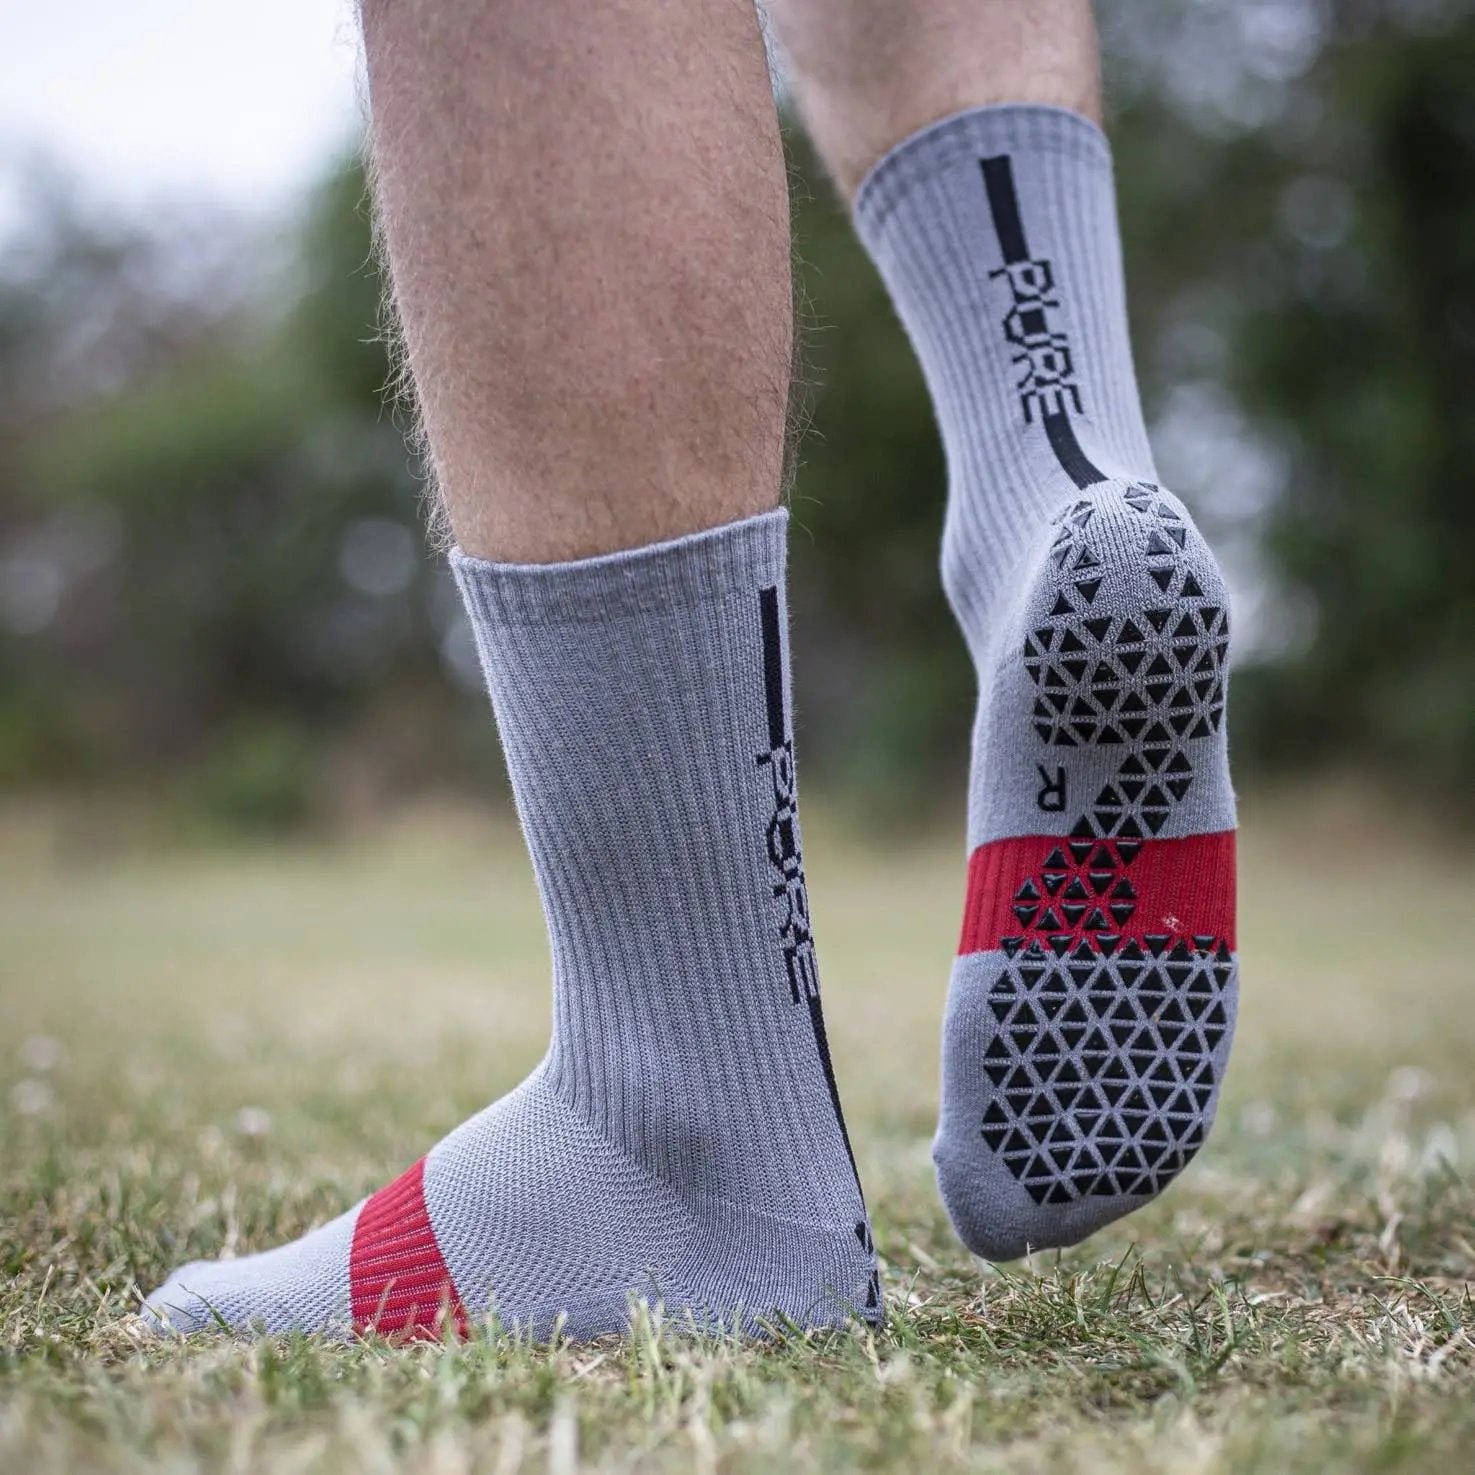 Pure Grip Socks Pro Stealth Red